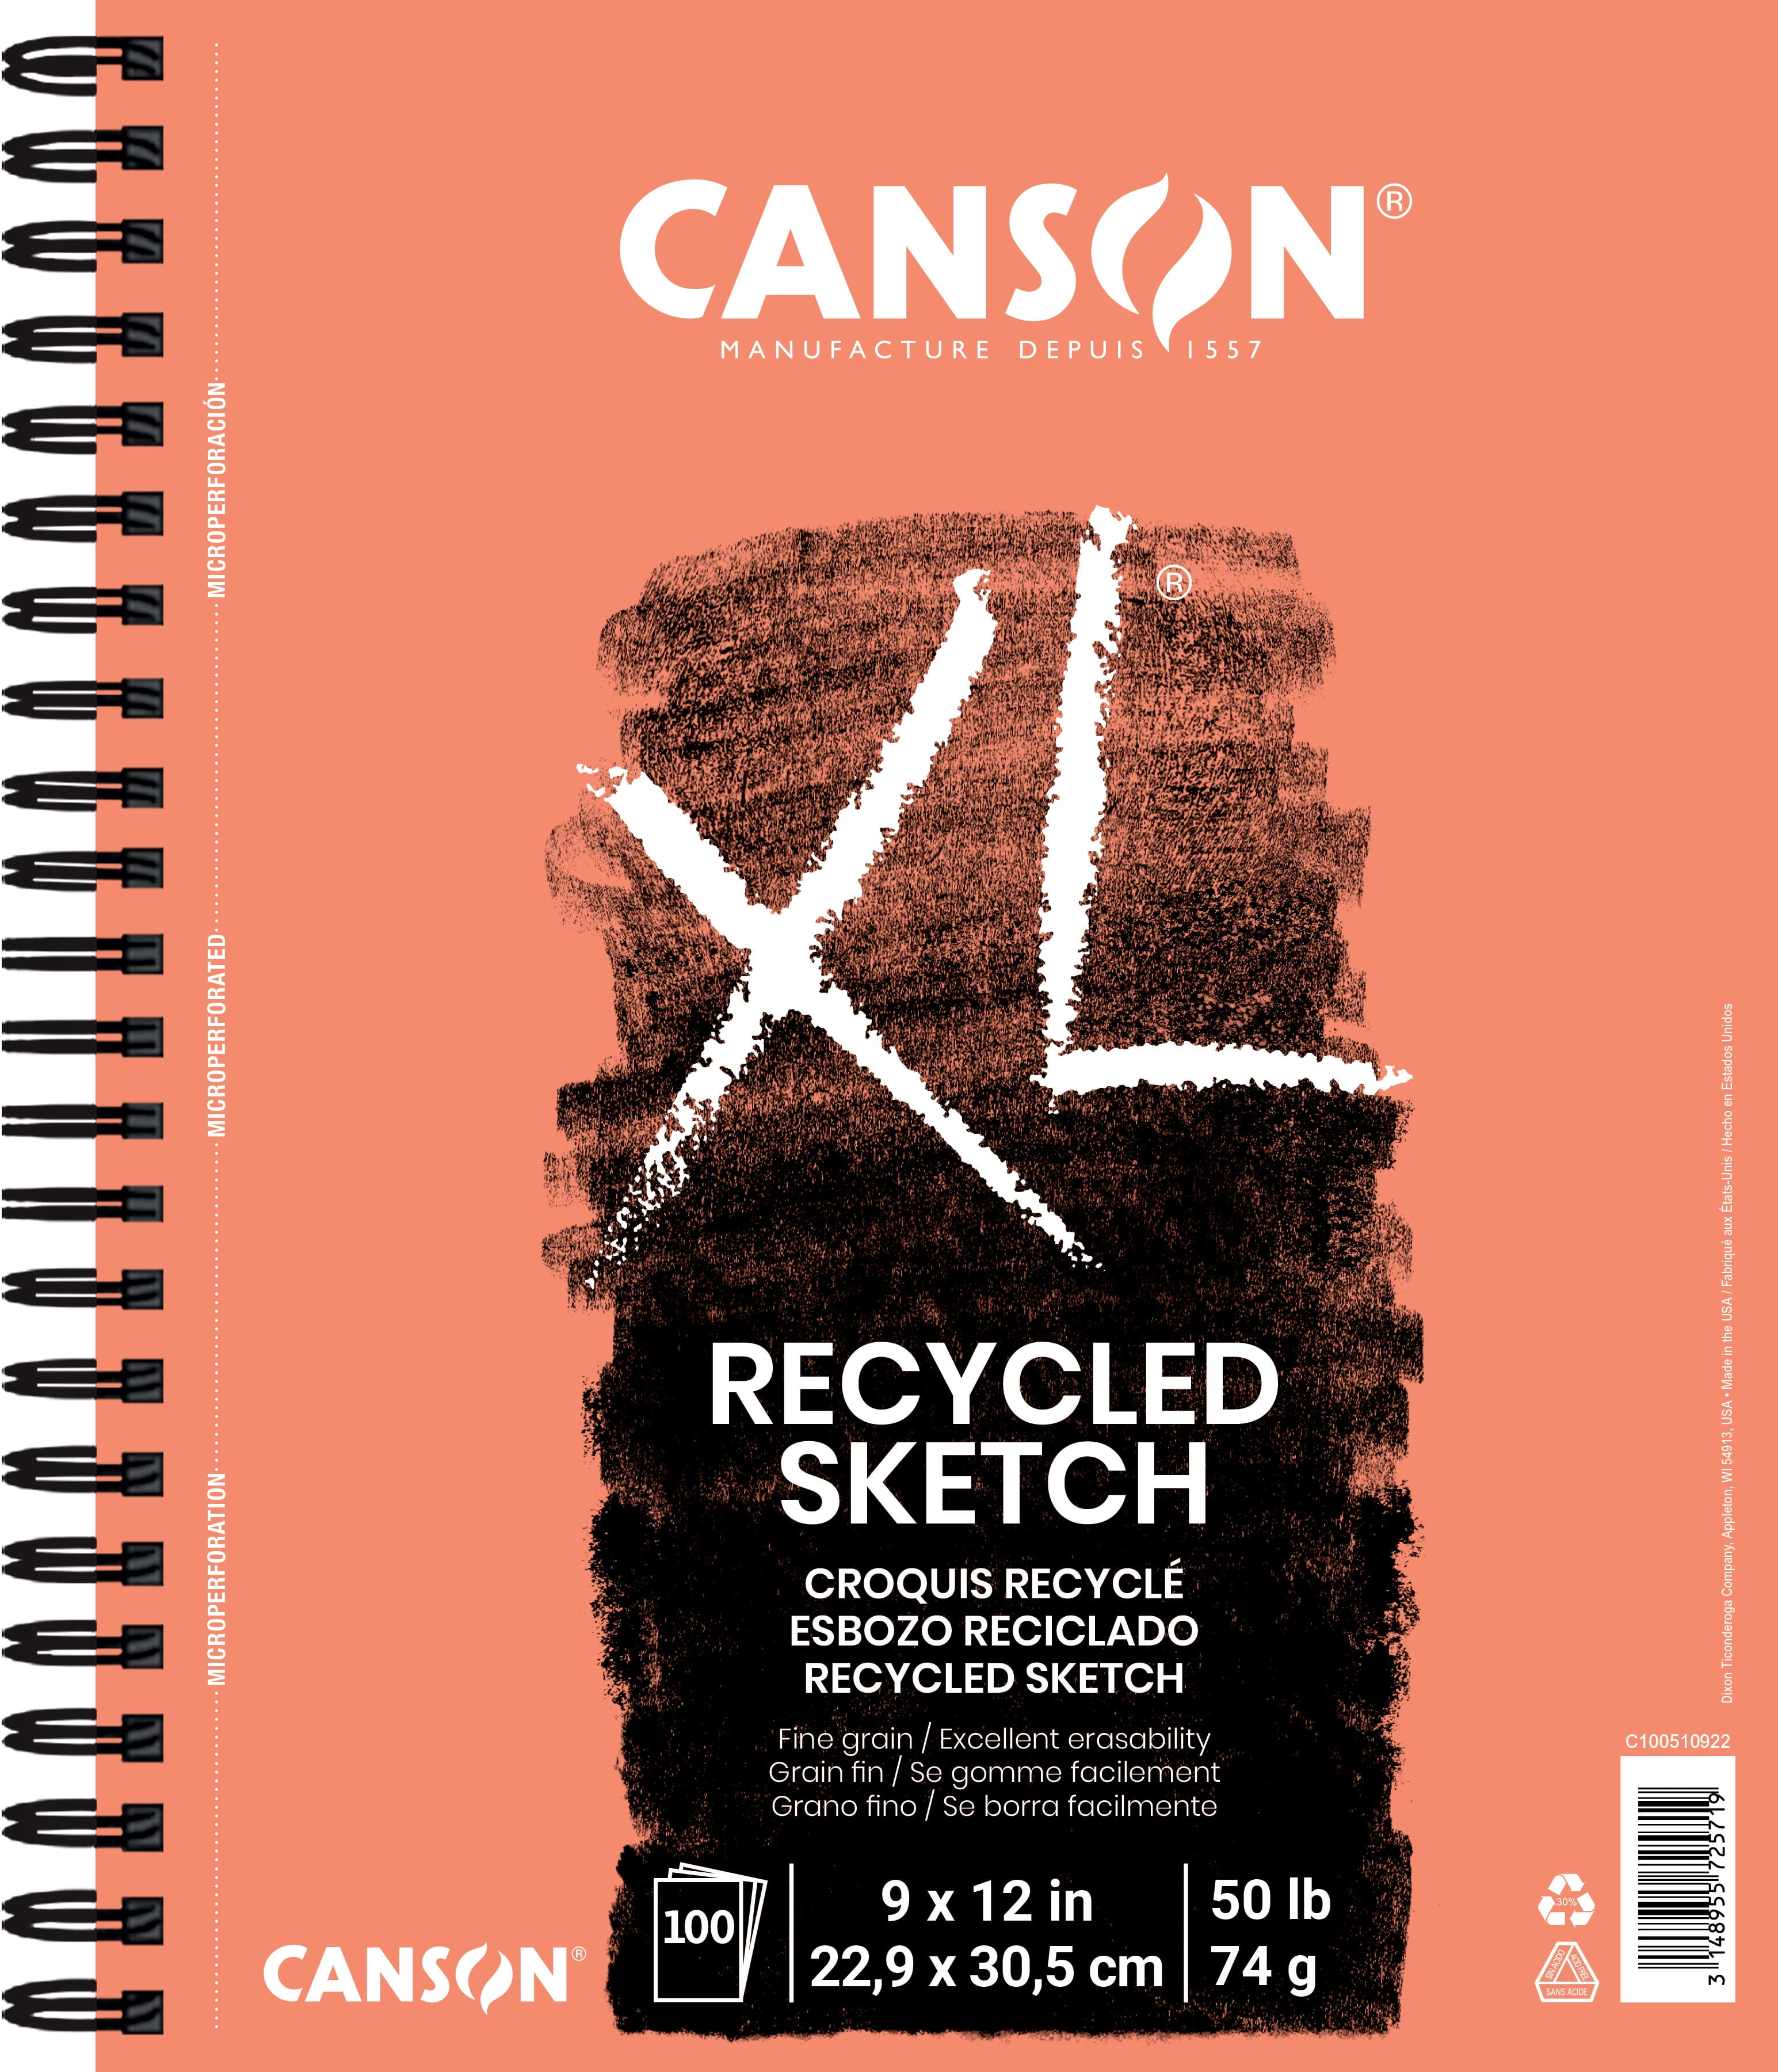 Canson 9 x 12 Wire Bound Sketch Book 80 Sheets/Book (16466)